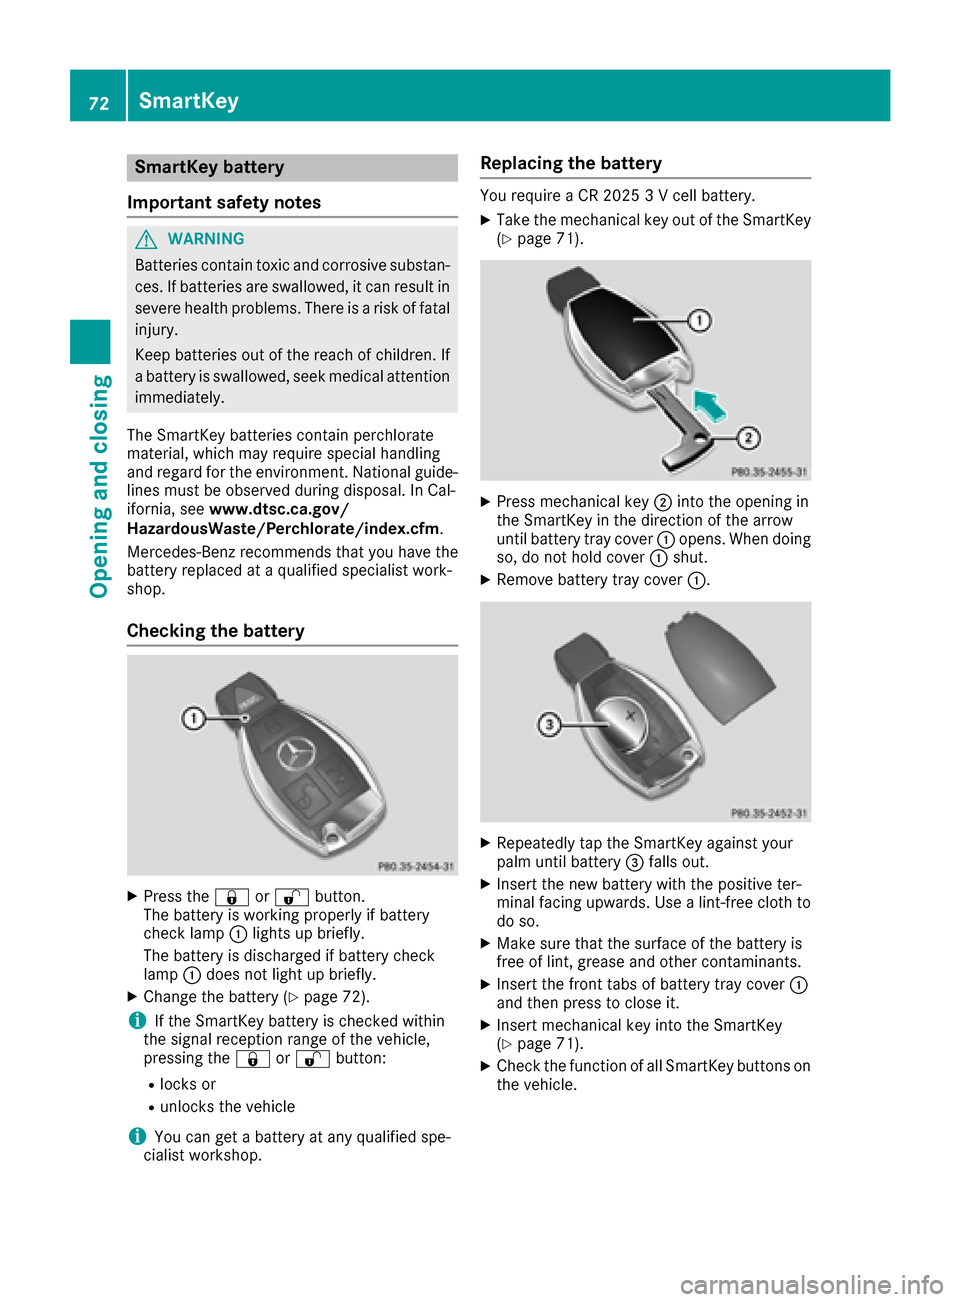 MERCEDES-BENZ CLA-Class 2017 C117 Owners Manual SmartKey battery
Important safety notes
GWARNING
Batteries contain toxic and corrosive substan- ces. If batteries are swallowed, it can result in
severe health problems. There is a risk of fatalinjury